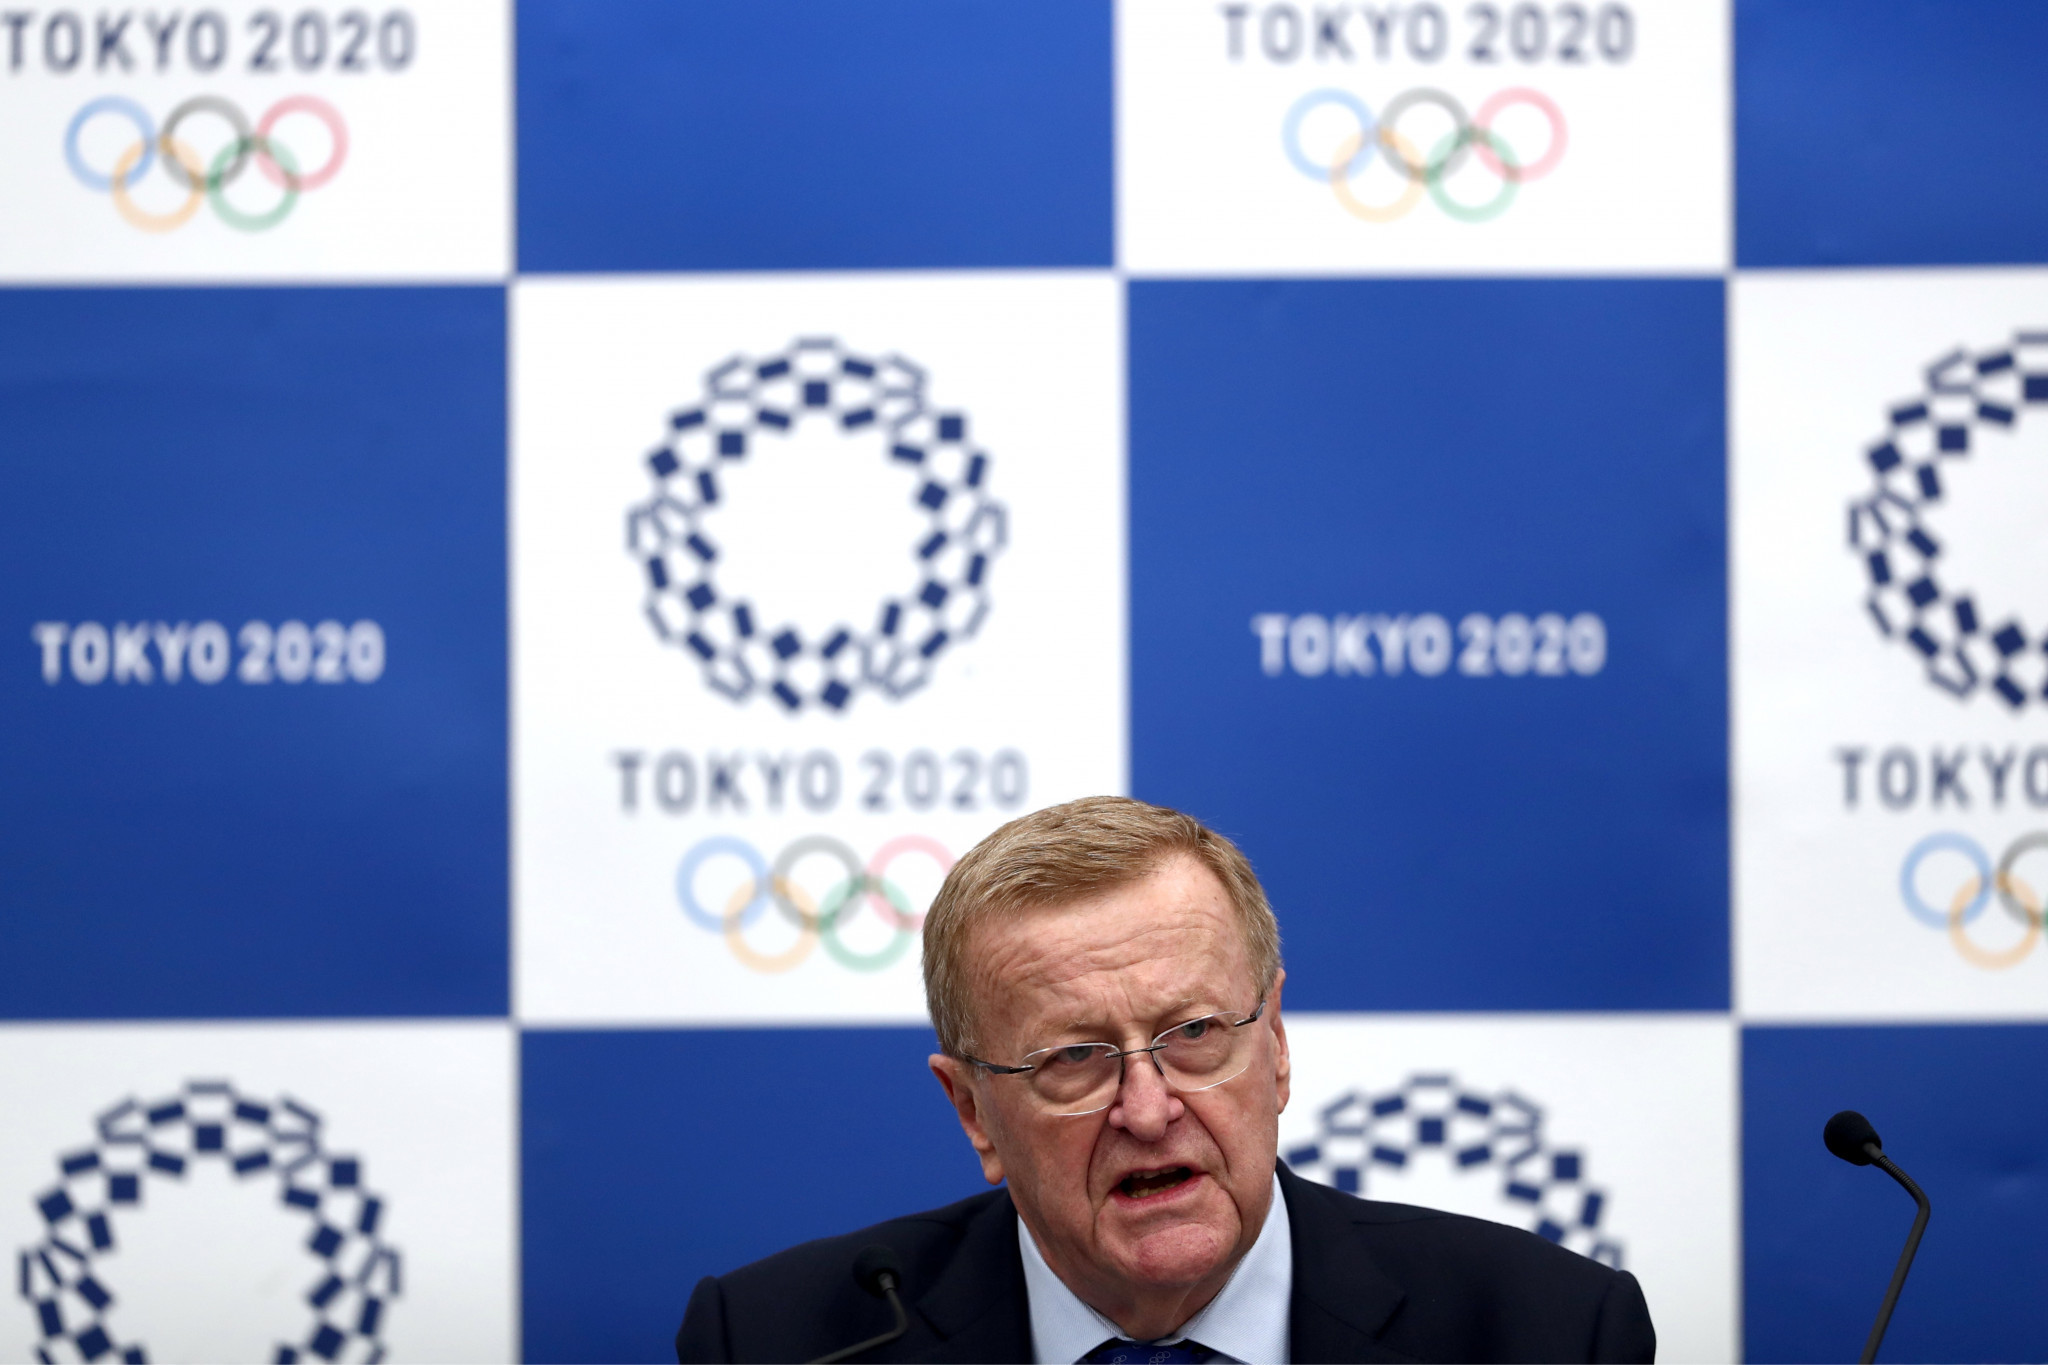 Coates "satisfied" Tokyo 2020 will be safe to attend amid coronavirus outbreak